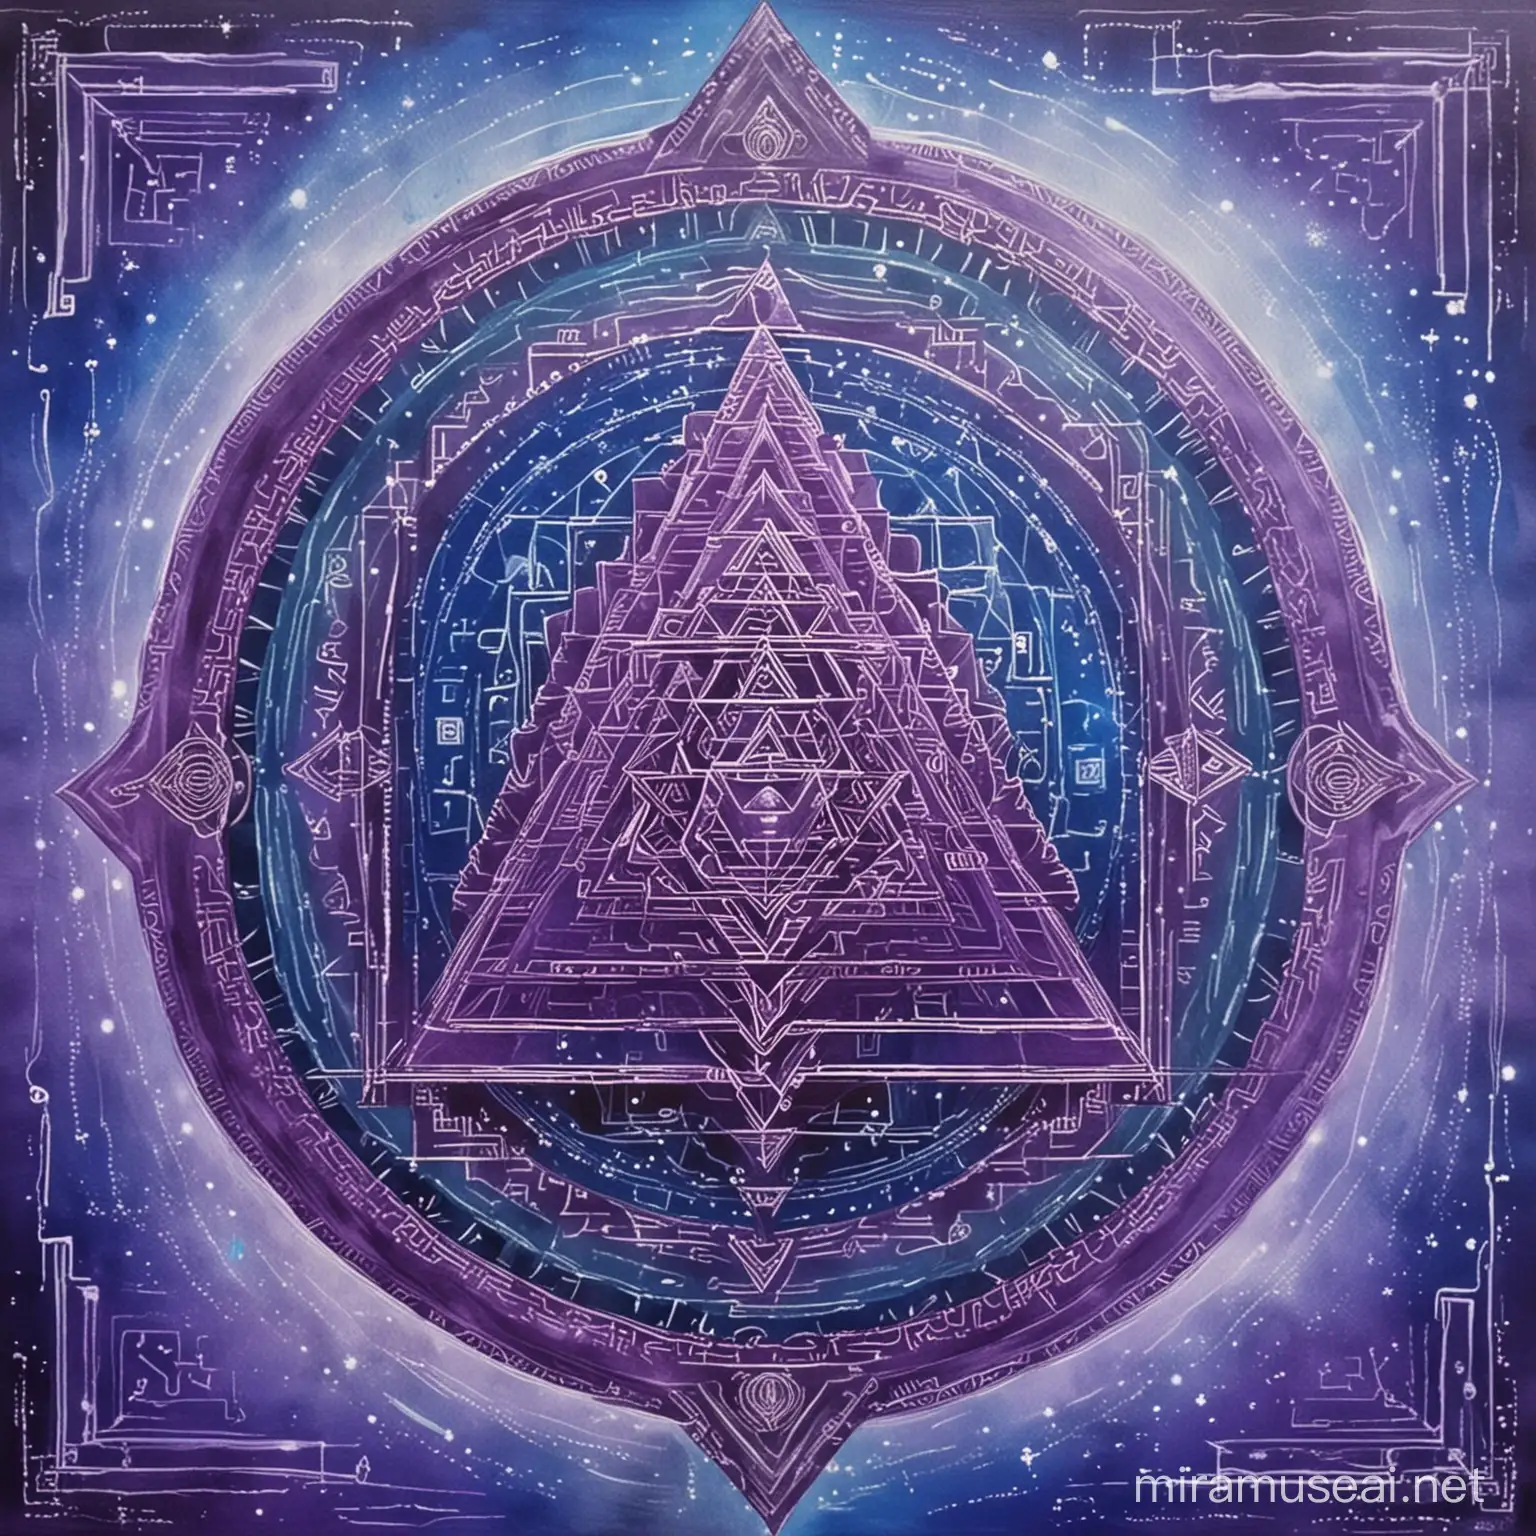 Divine Connection Surreal Artwork Featuring a Sri Yantra in Deep Blue and Purple Hues